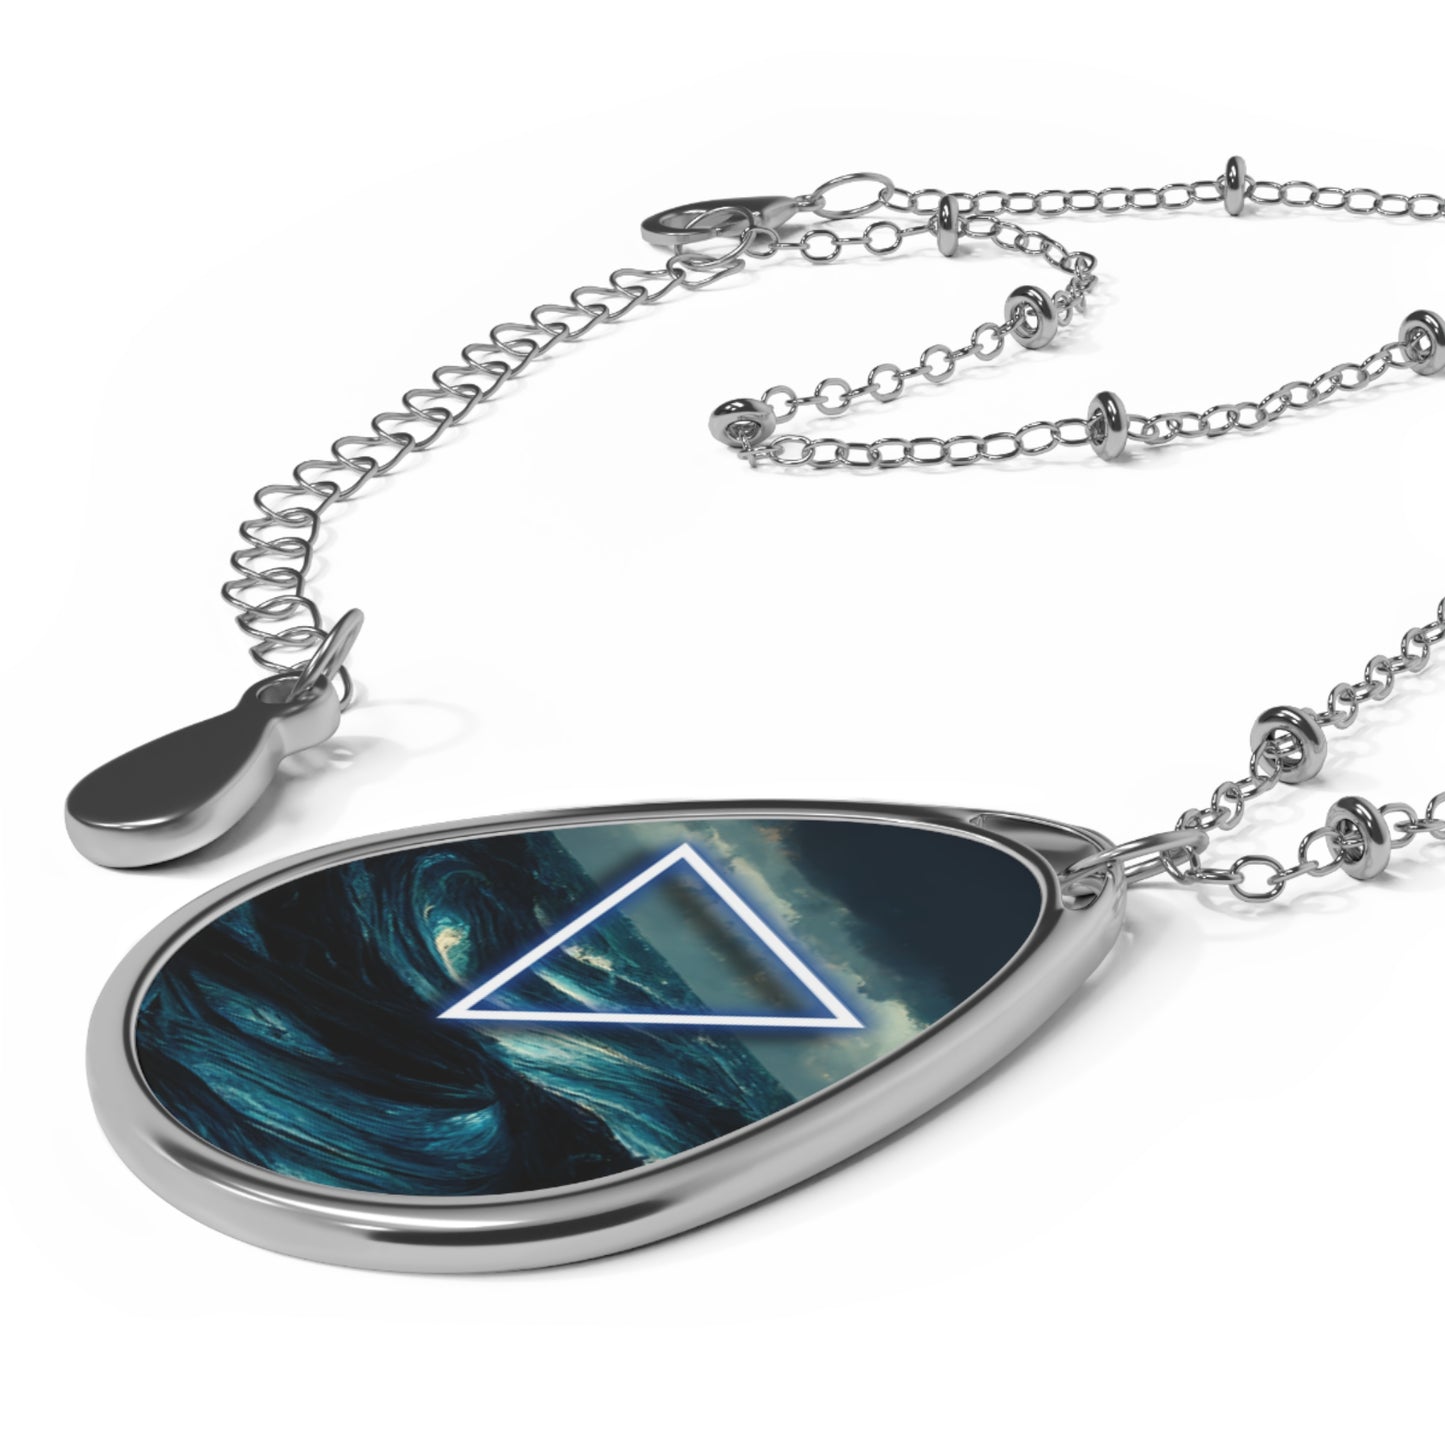 Water Symbol Necklace | Magical Jewelry | Occult Symbol of the Elements